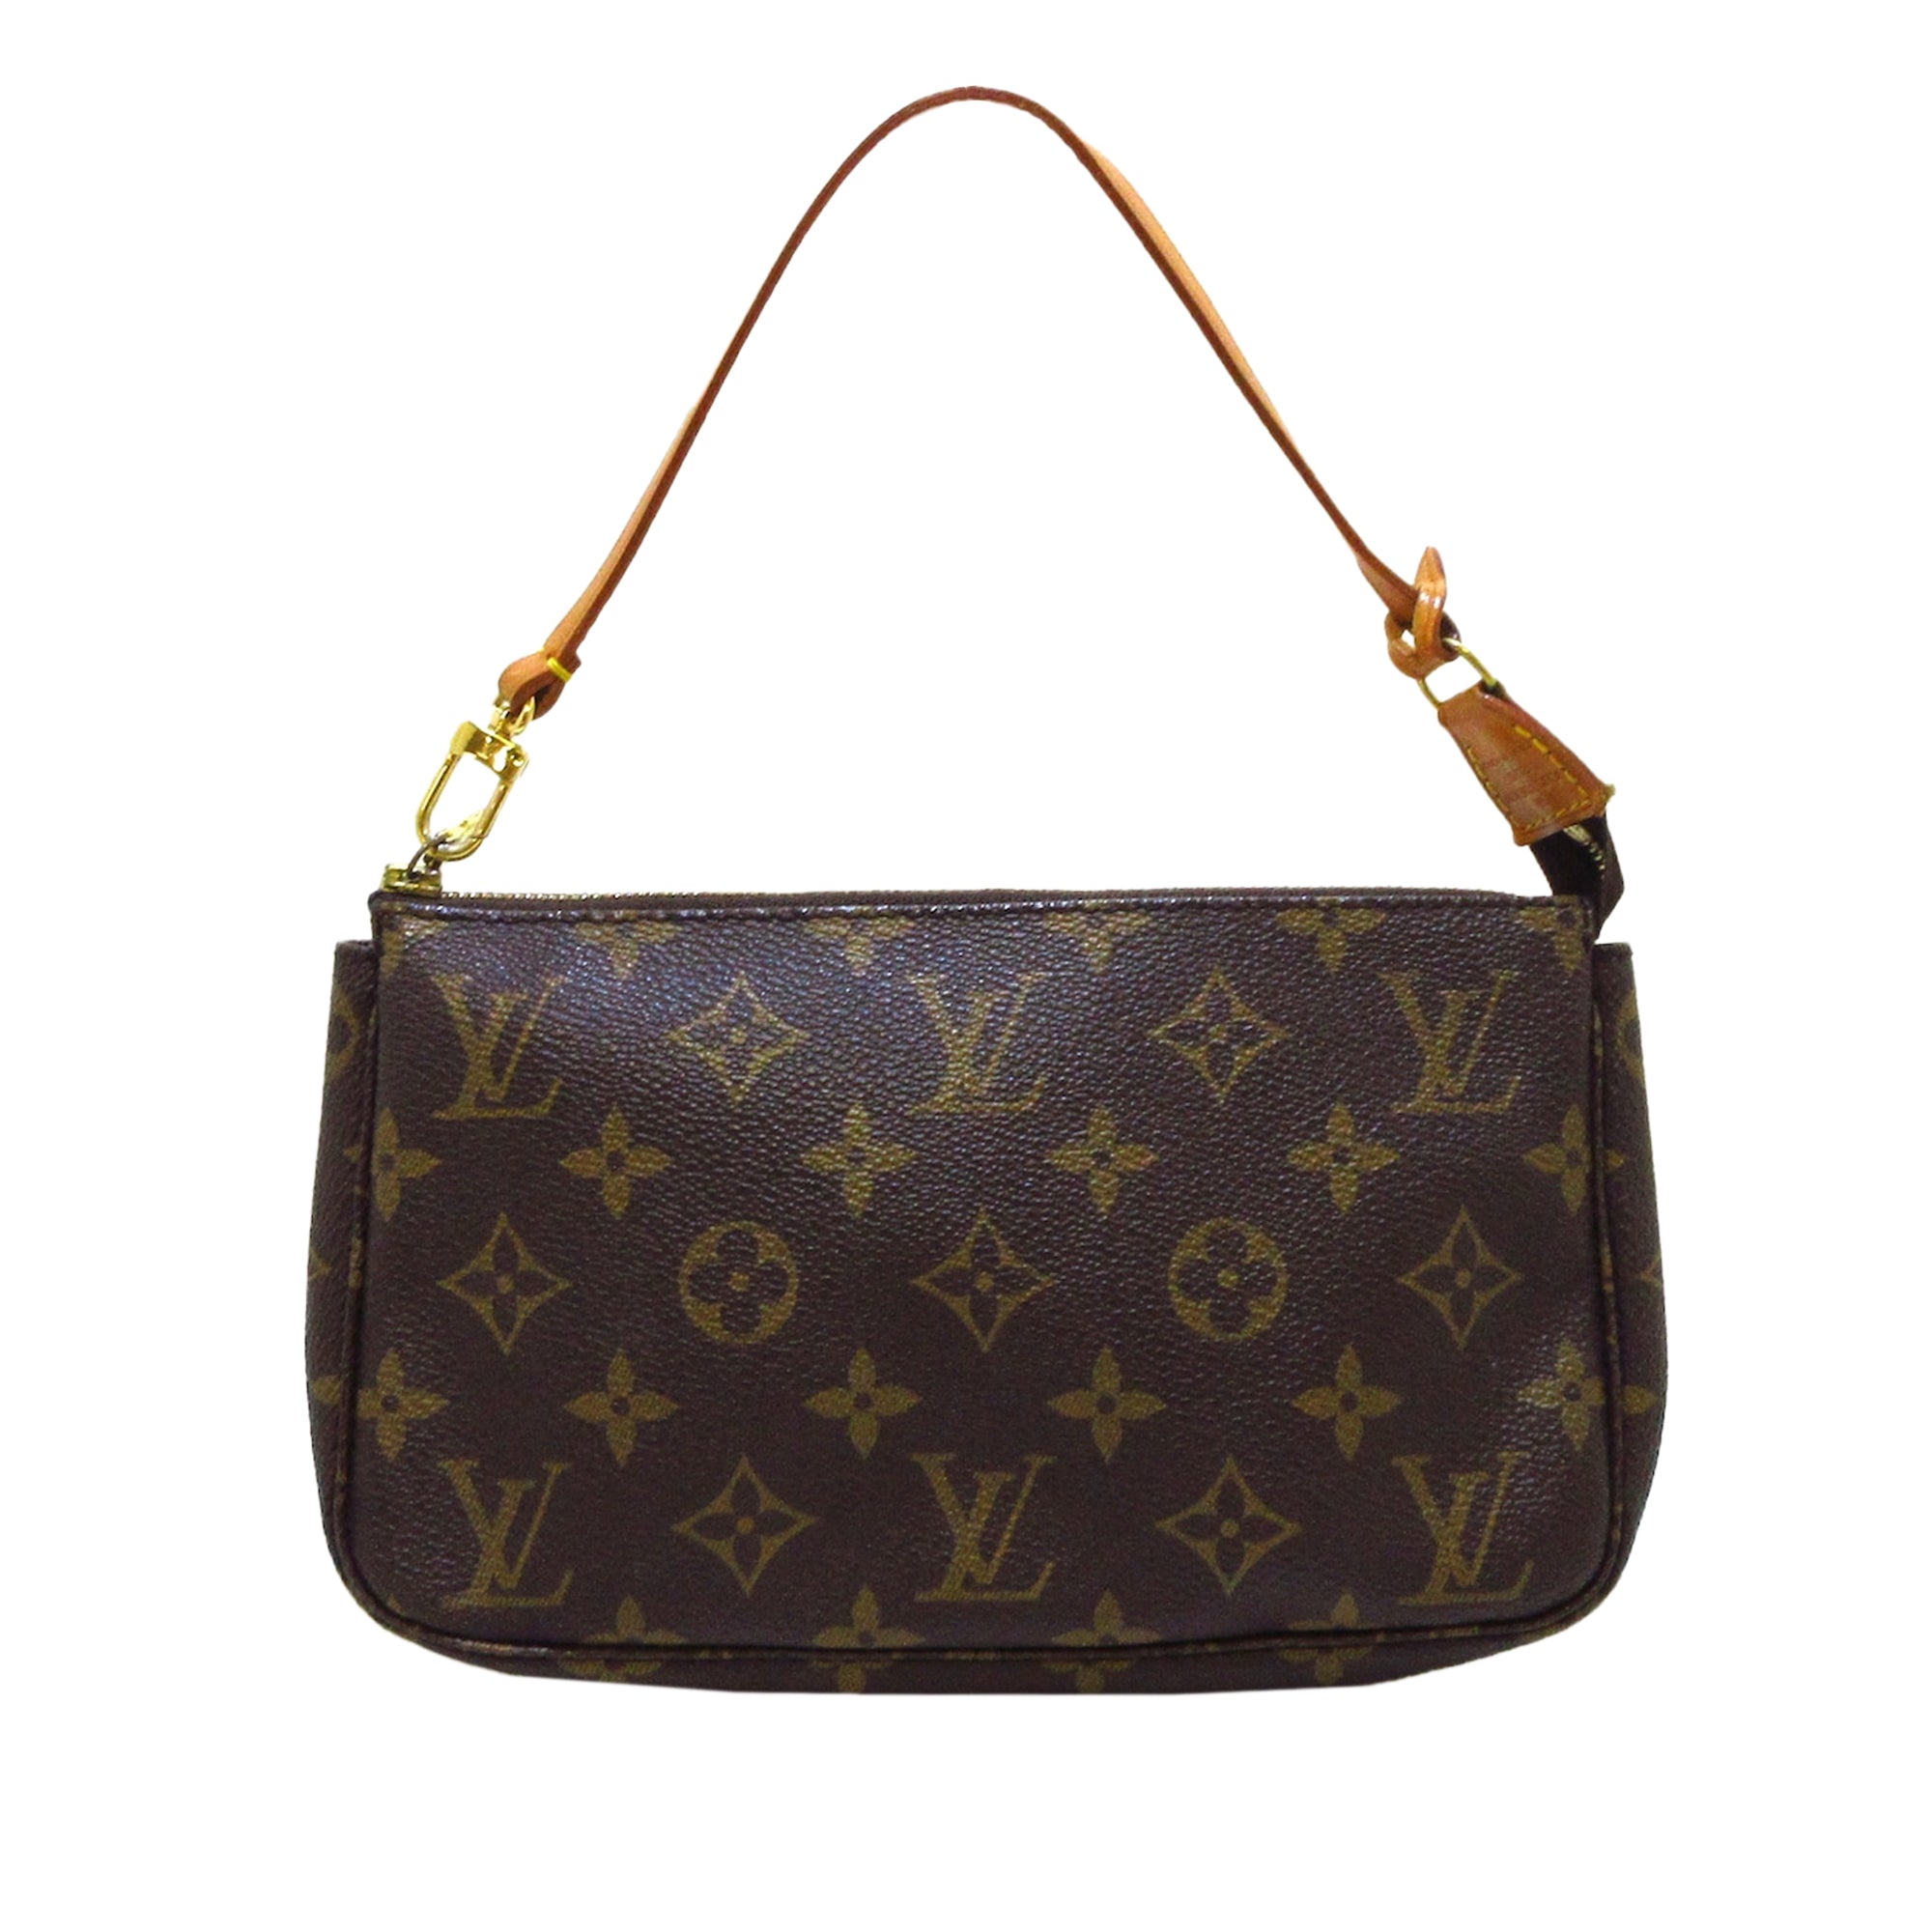 louis vuitton sac plat handbag in monogram canvas and natural leather, RvceShops Revival